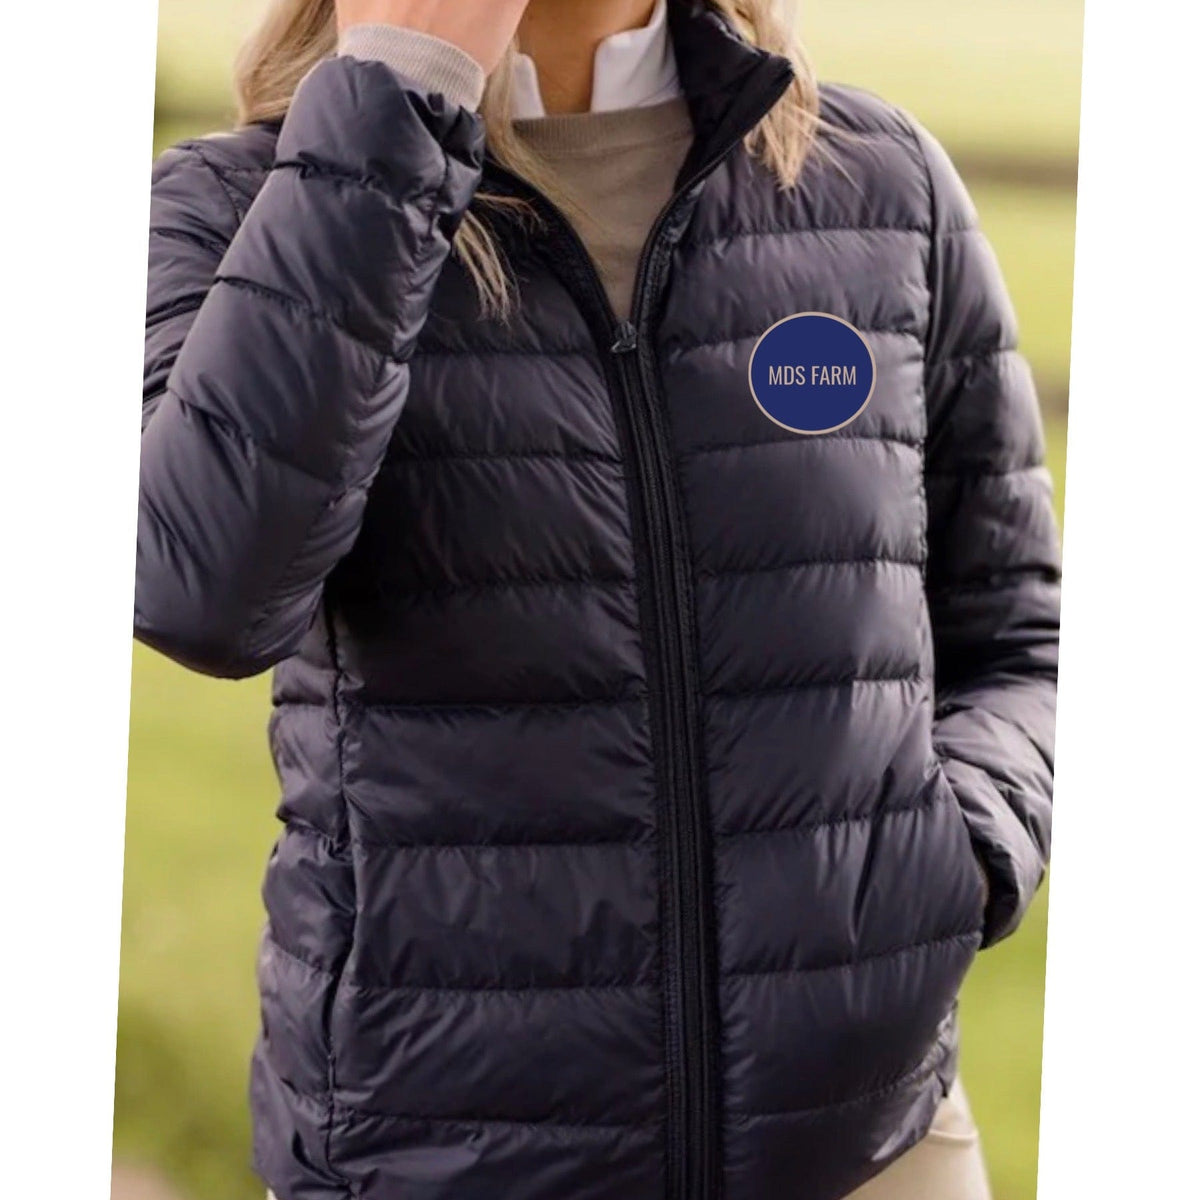 Equestrian Team Apparel XS / Jacket MDS Farm Ladies Puffy Vest and Jacket equestrian team apparel online tack store mobile tack store custom farm apparel custom show stable clothing equestrian lifestyle horse show clothing riding clothes horses equestrian tack store